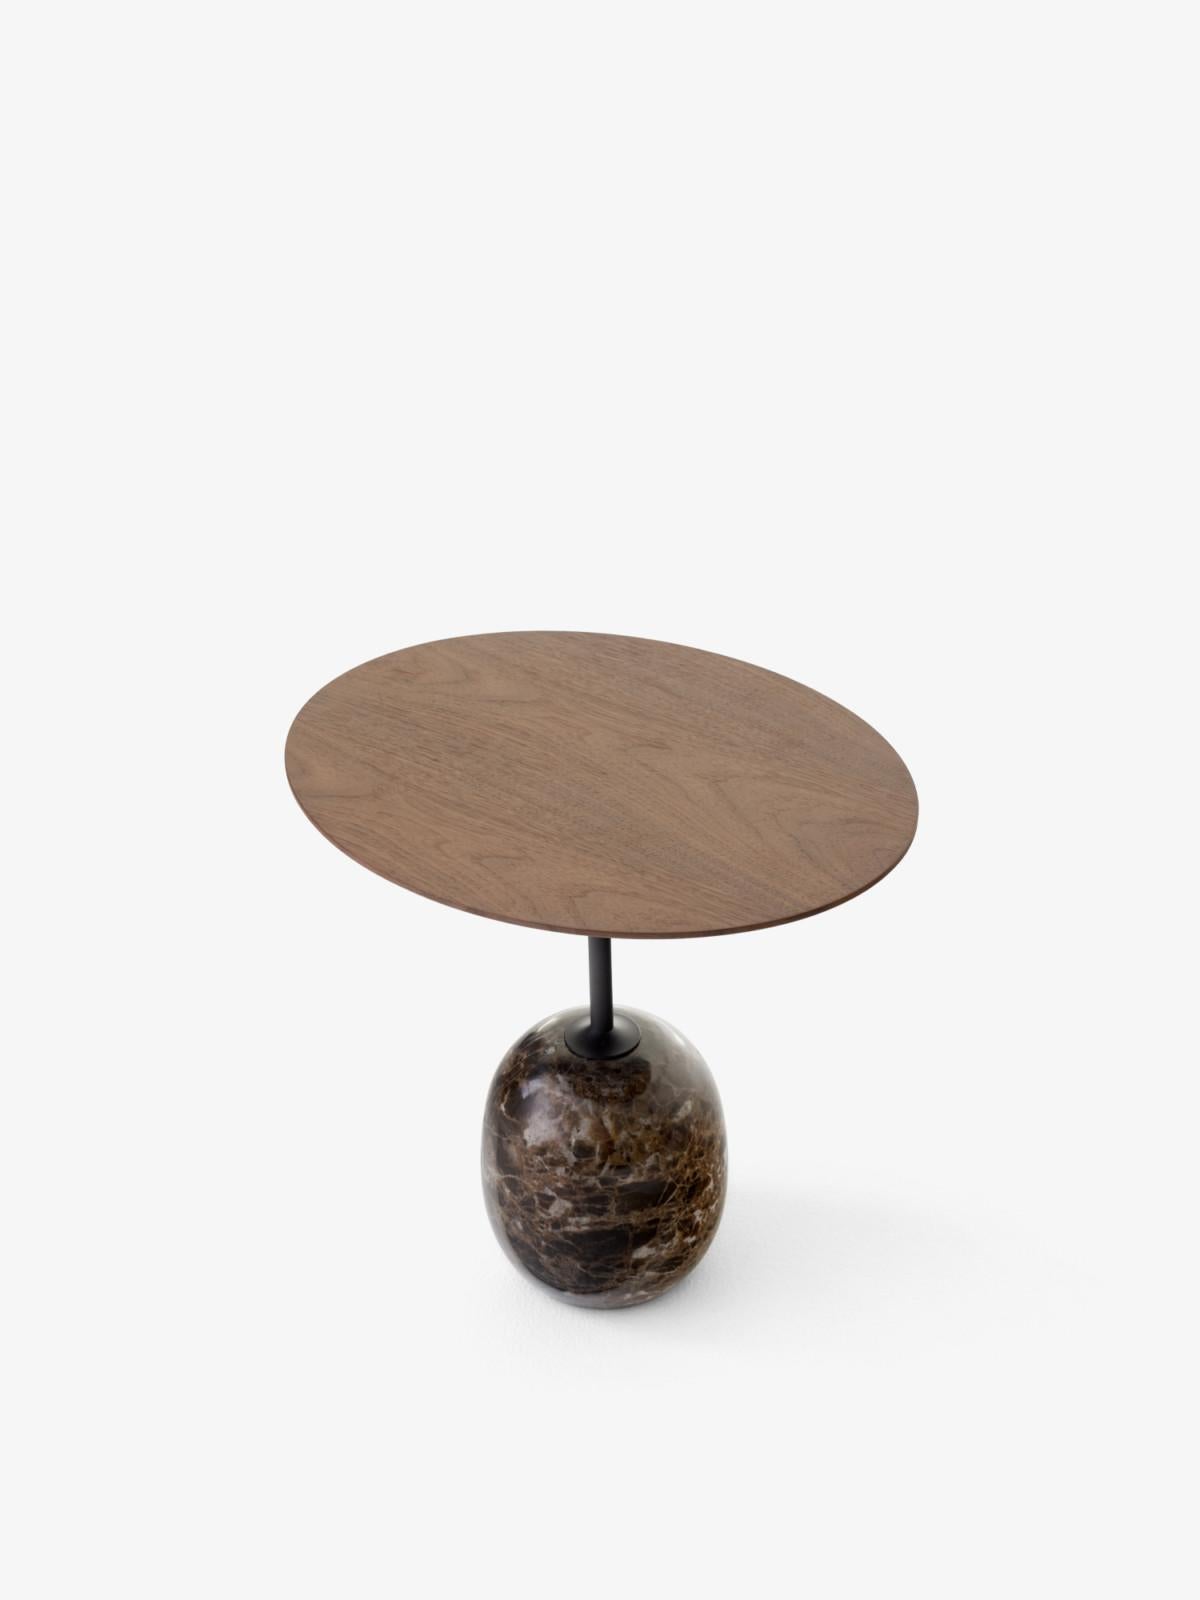 At first glance, Lato resembles a sculpture, with its slim, oval and round table top balanced by an oval-shaped base.
Striking, graphic and poetic, its purity of form is proof that simple is sophisticated.
With Lato, Nichetto wanted to keep the